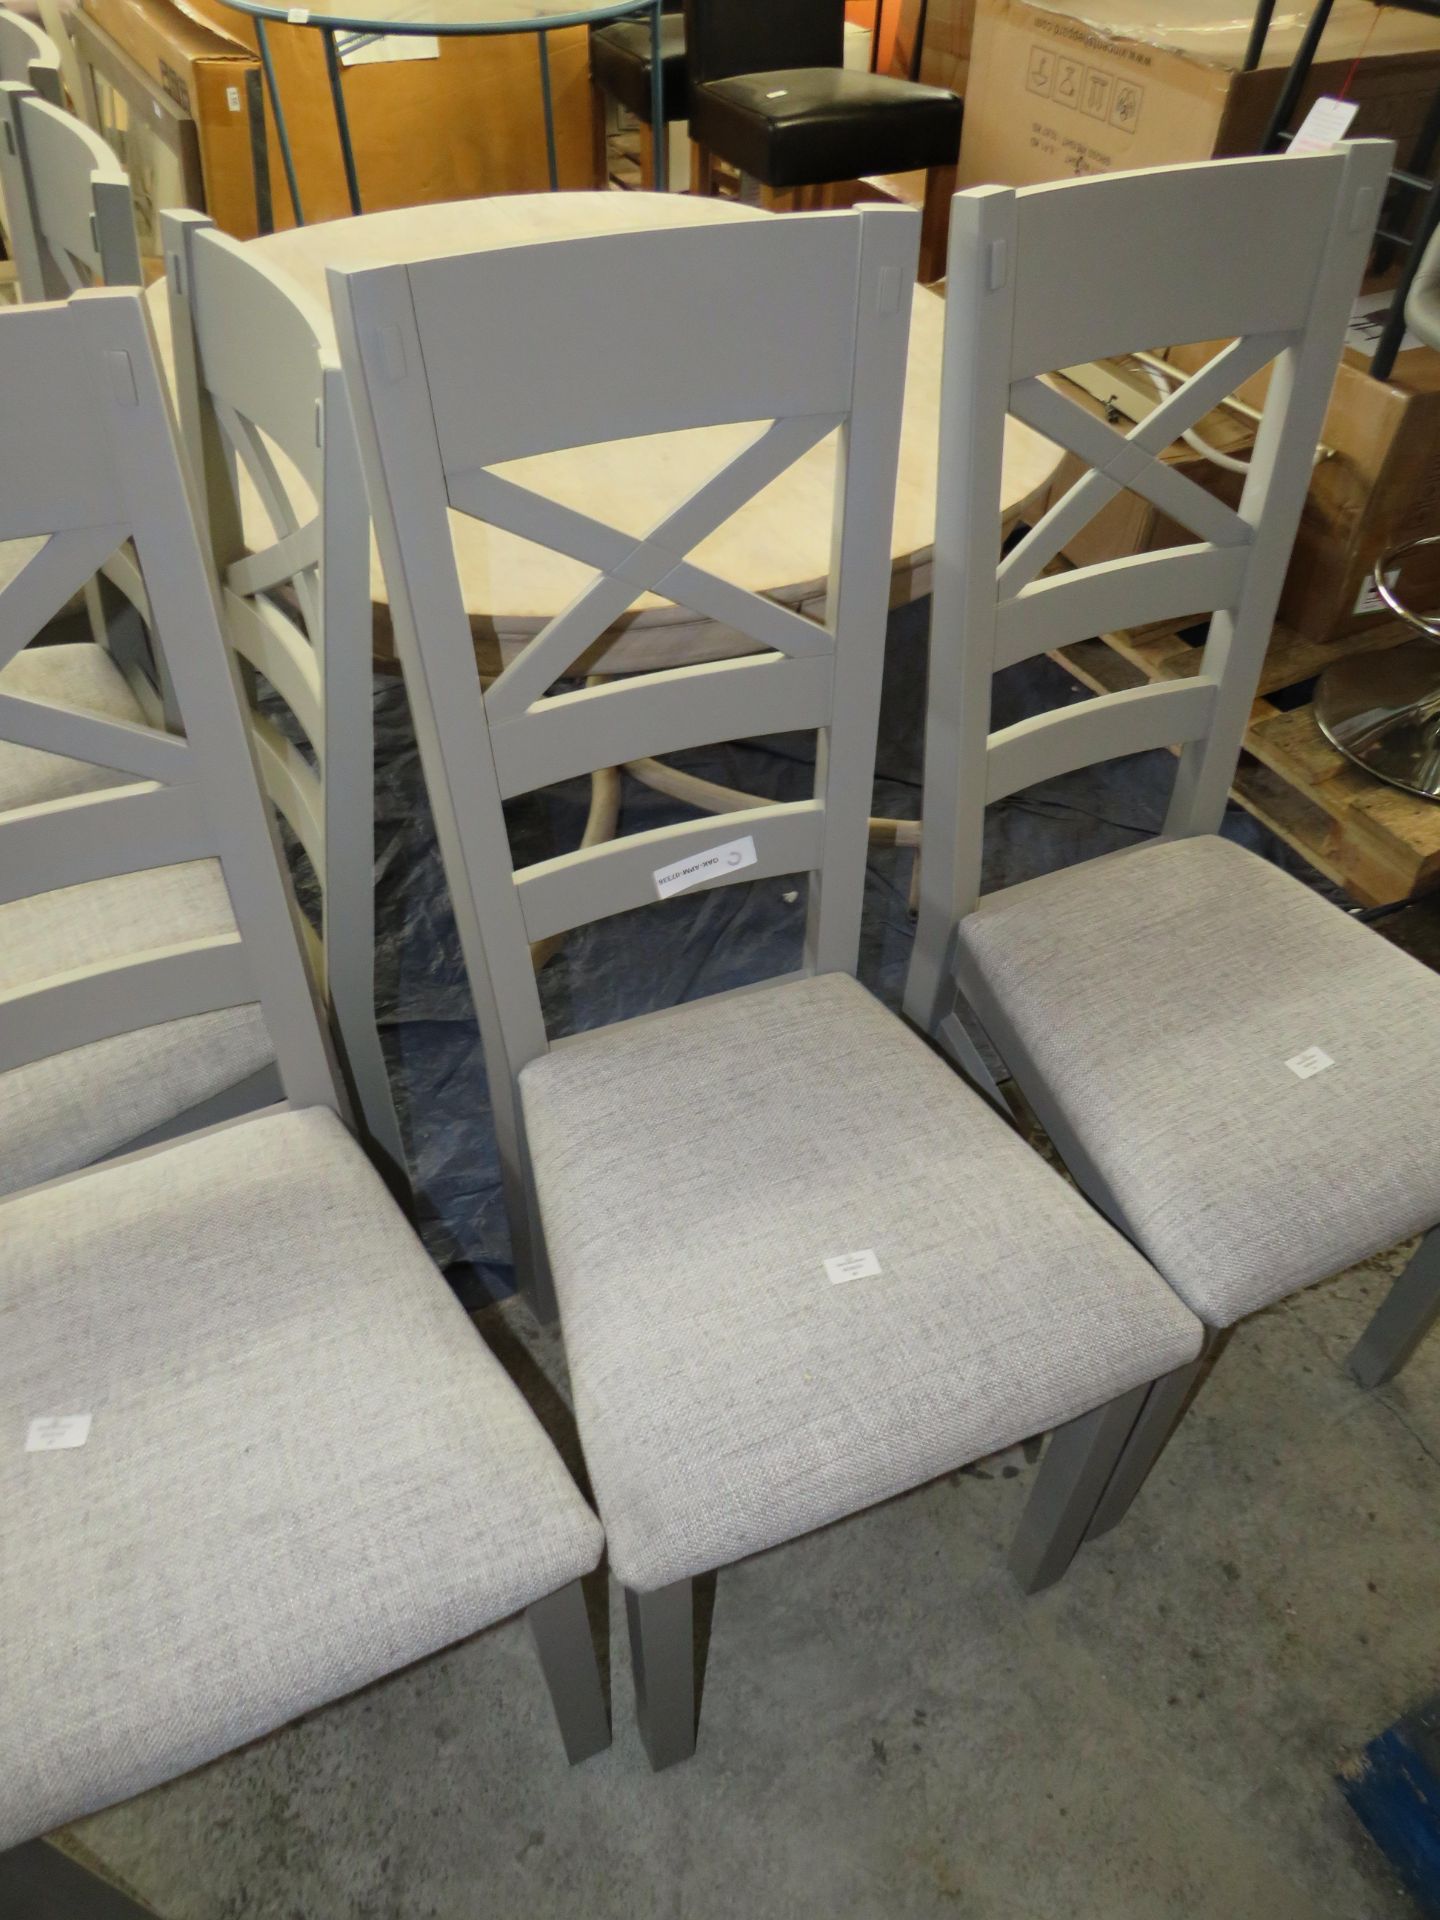 Oak Furnitureland St Ives Light Grey Painted Chair With Plain Grey Fabric Seat RRP 170.00 These